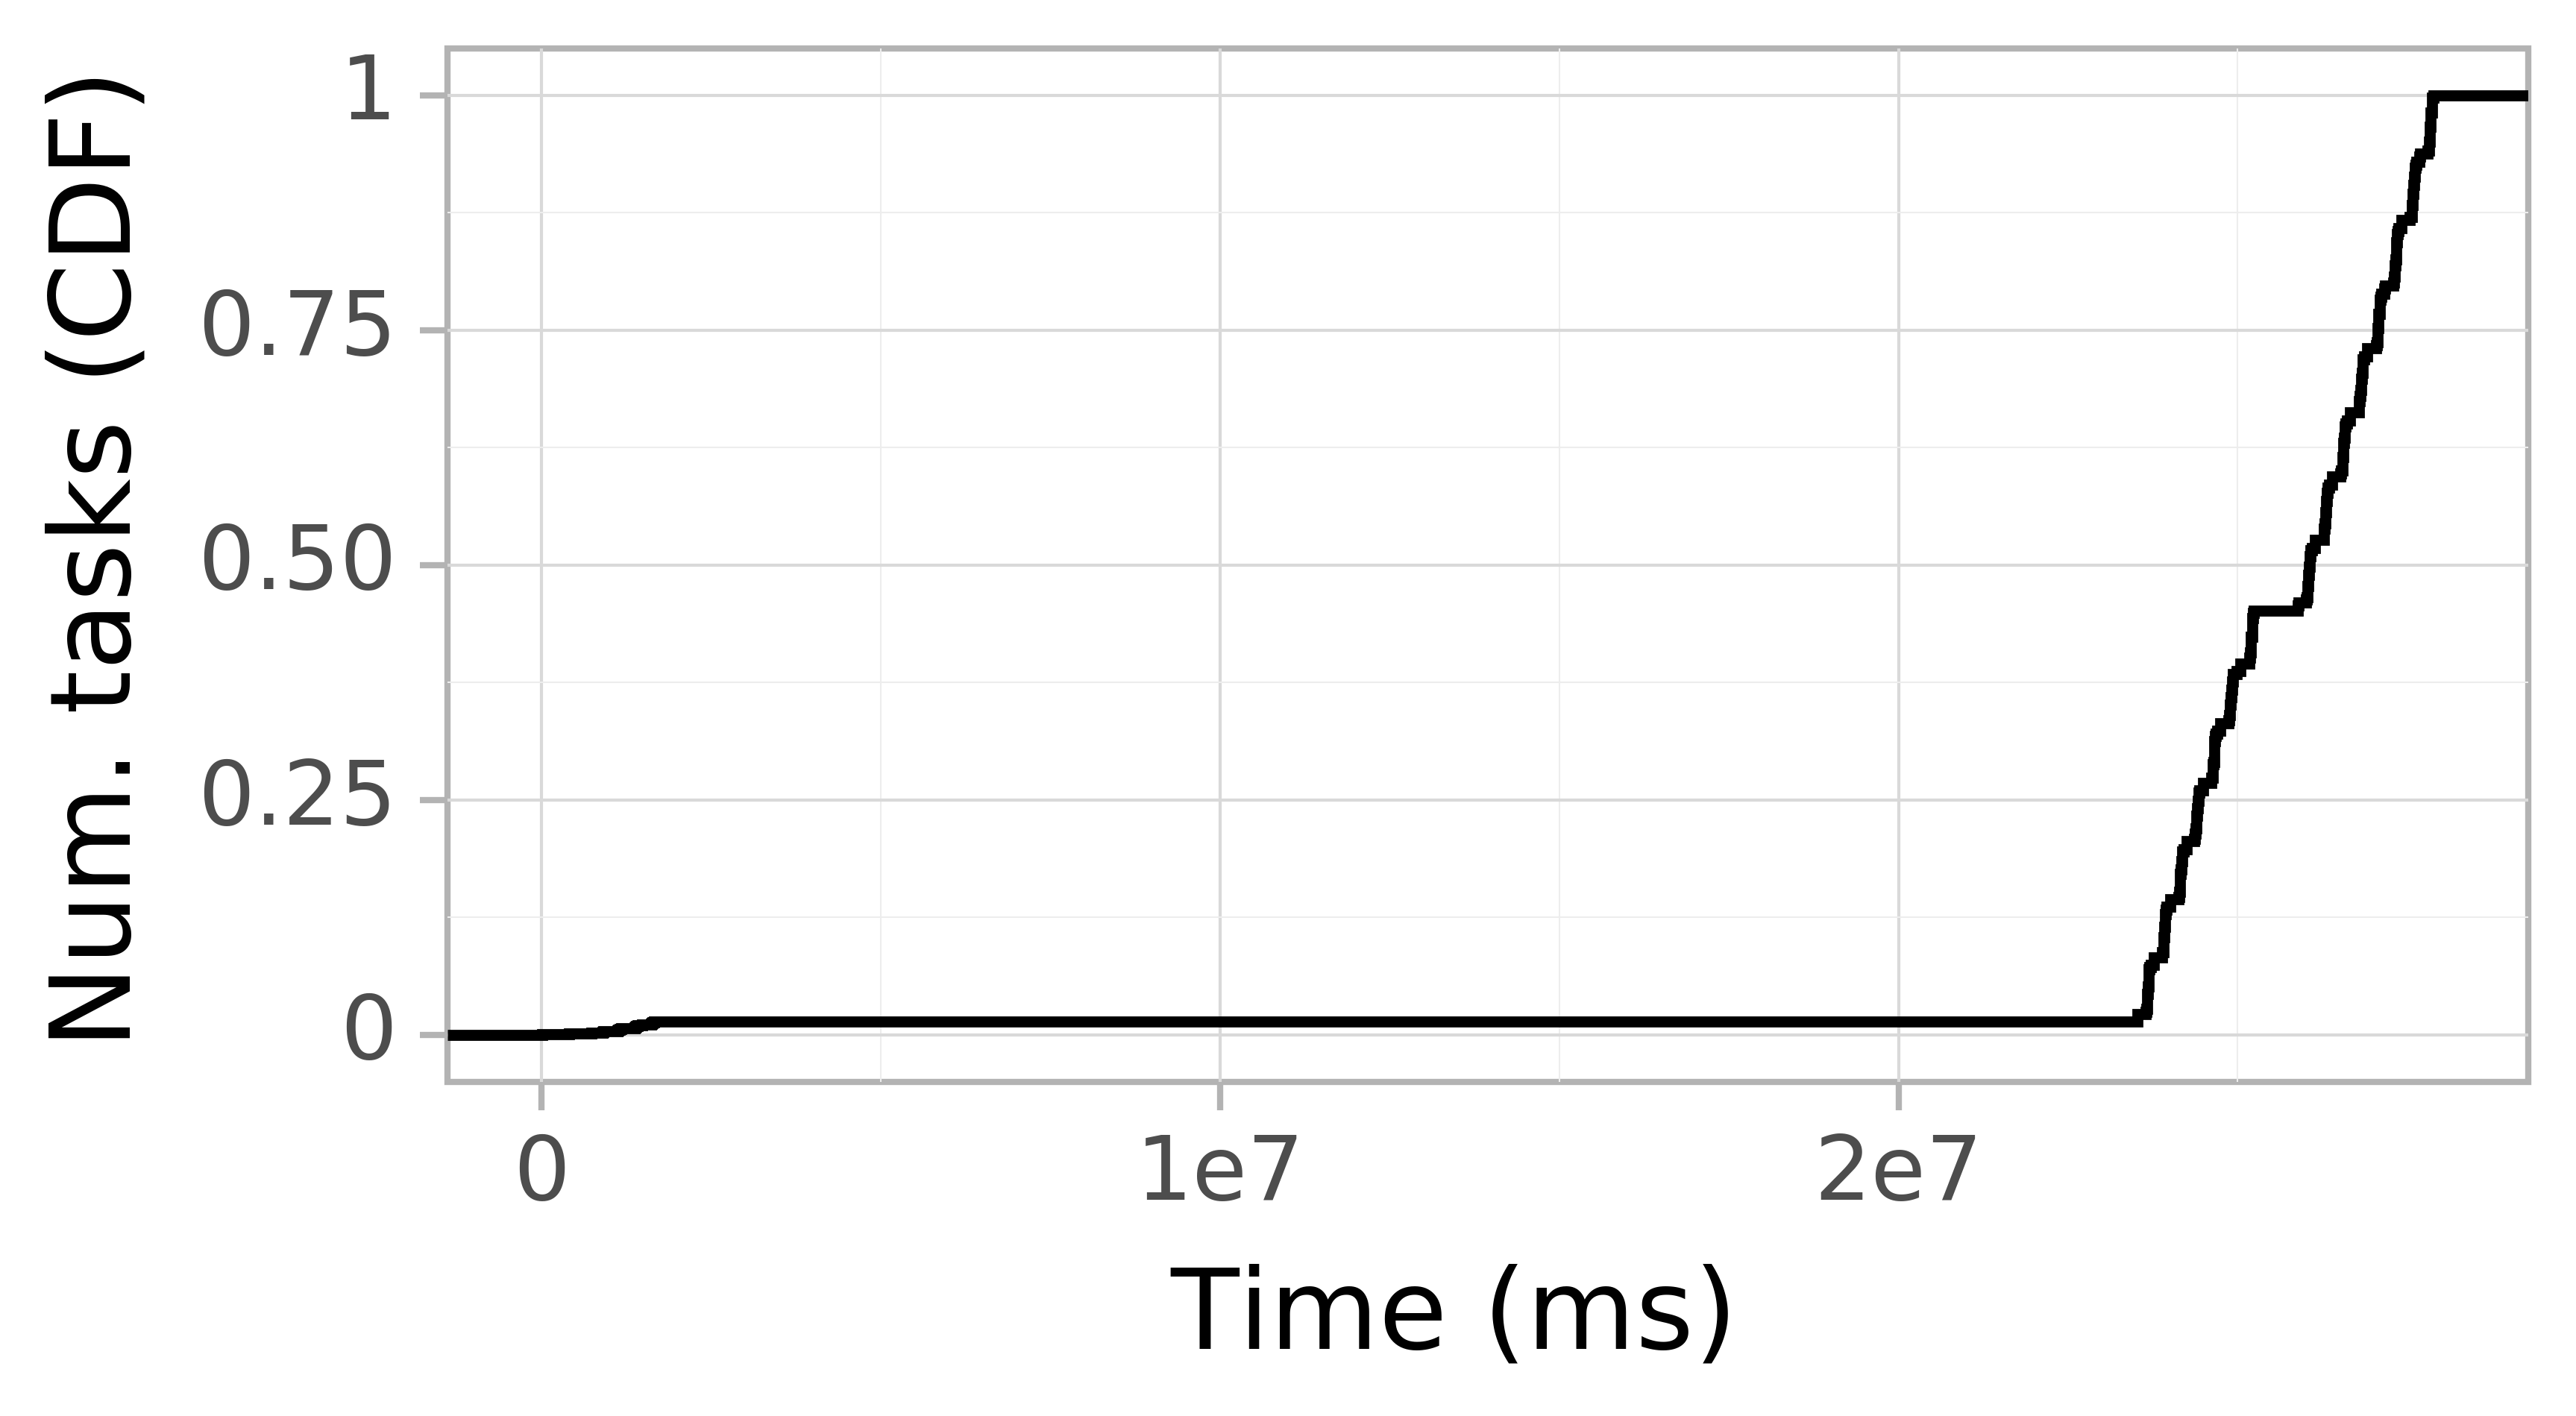 Task arrival CDF graph for the askalon-new_ee36 trace.